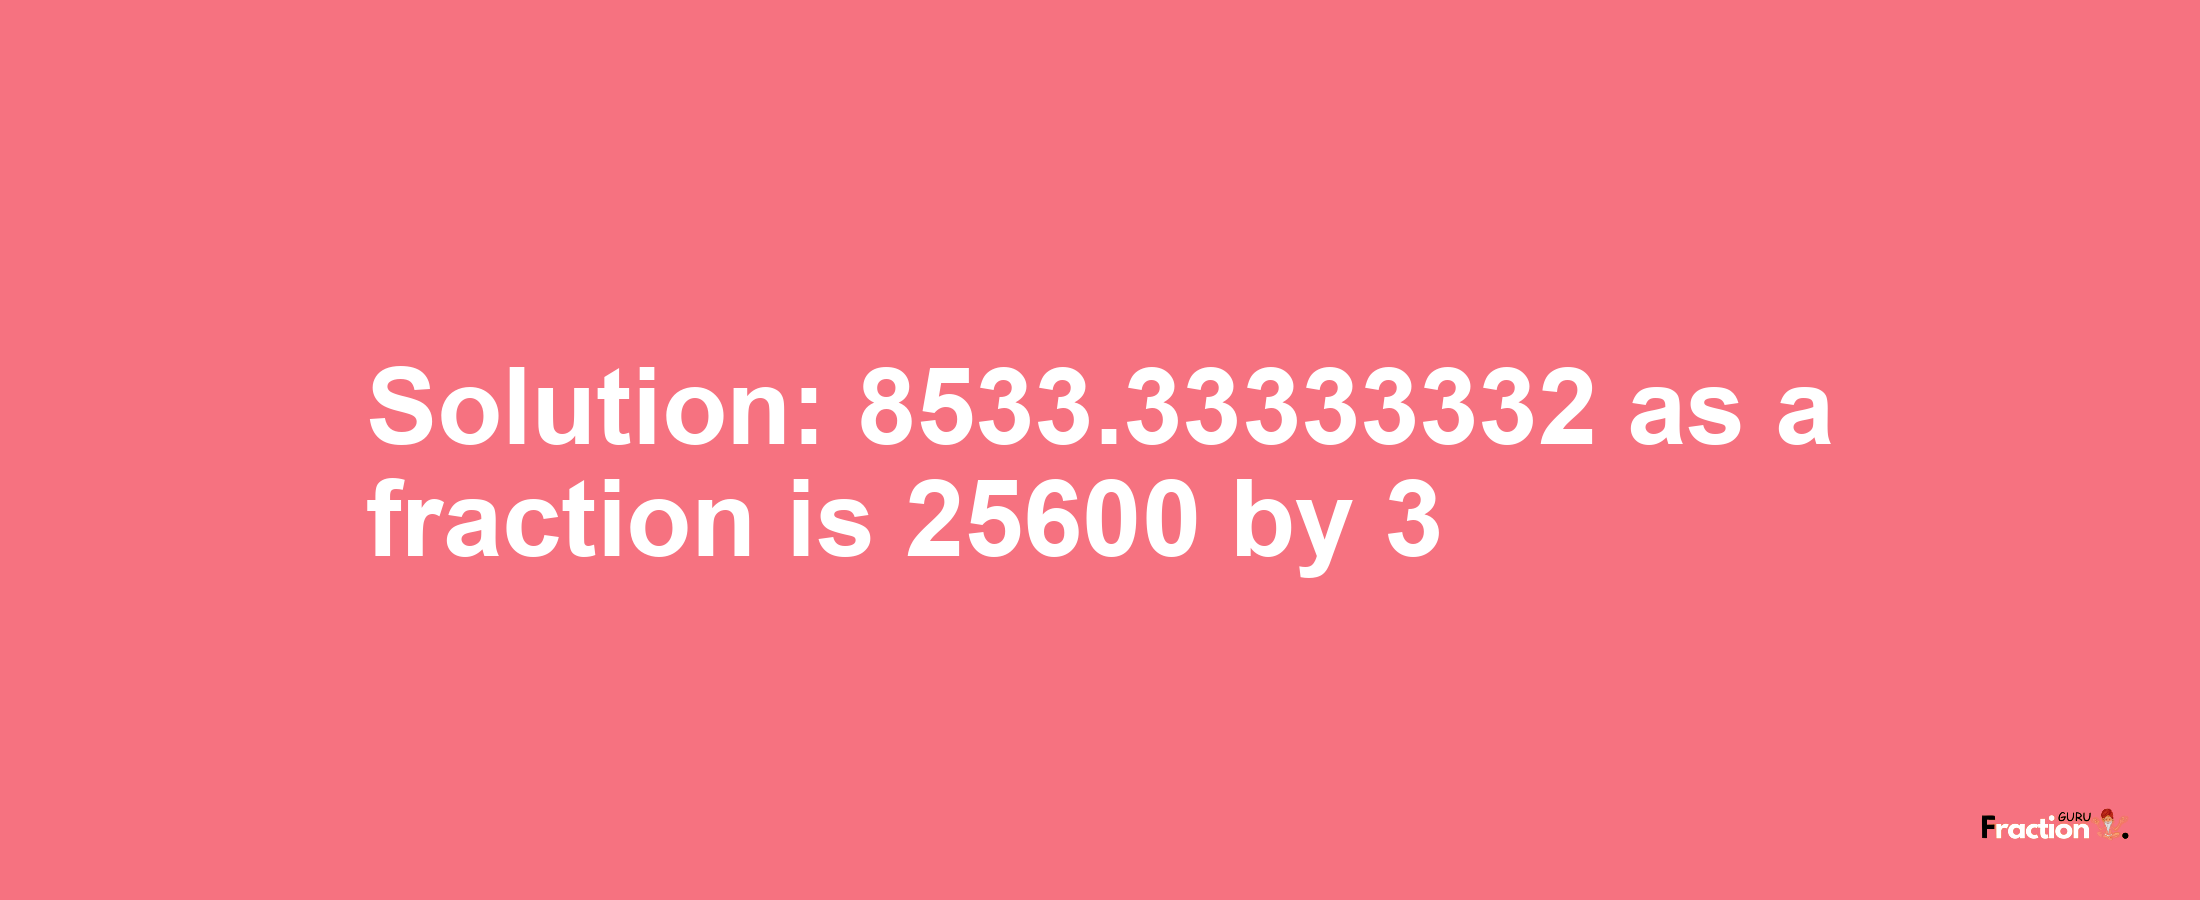 Solution:8533.33333332 as a fraction is 25600/3